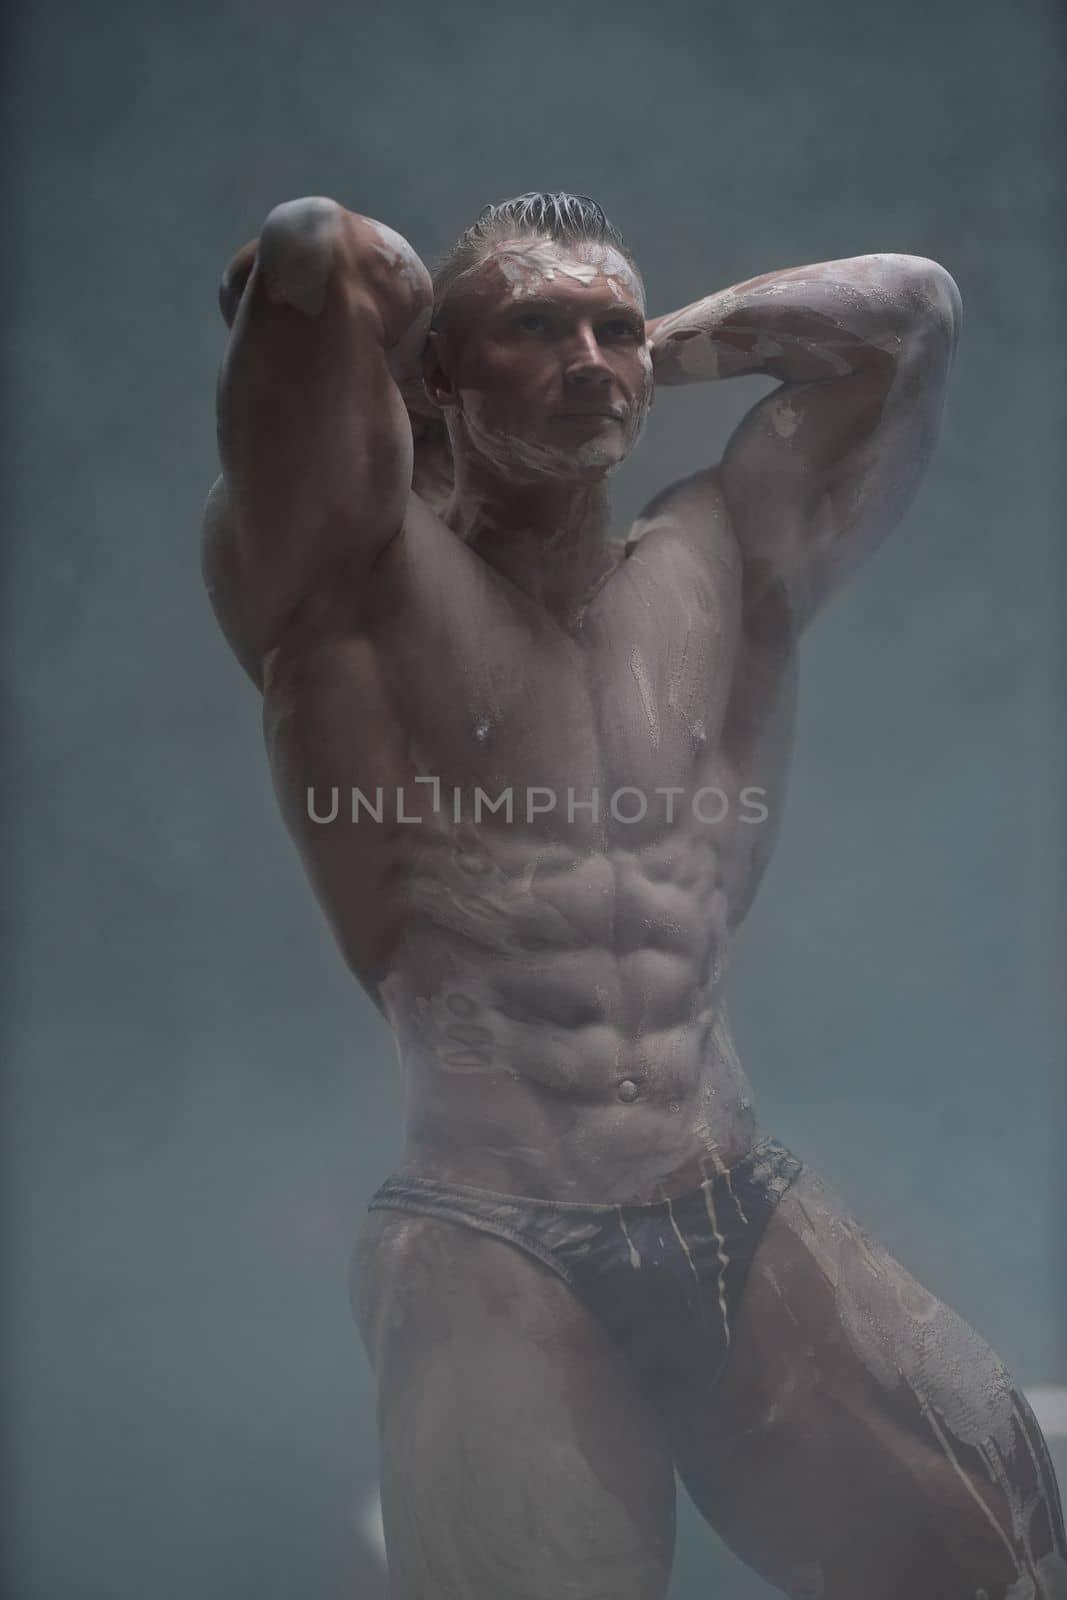 Studio shot of a muscular man. A muscular man shows off his perfect shirtless torso with his hands behind his head. Professional bodybuilder posing concept